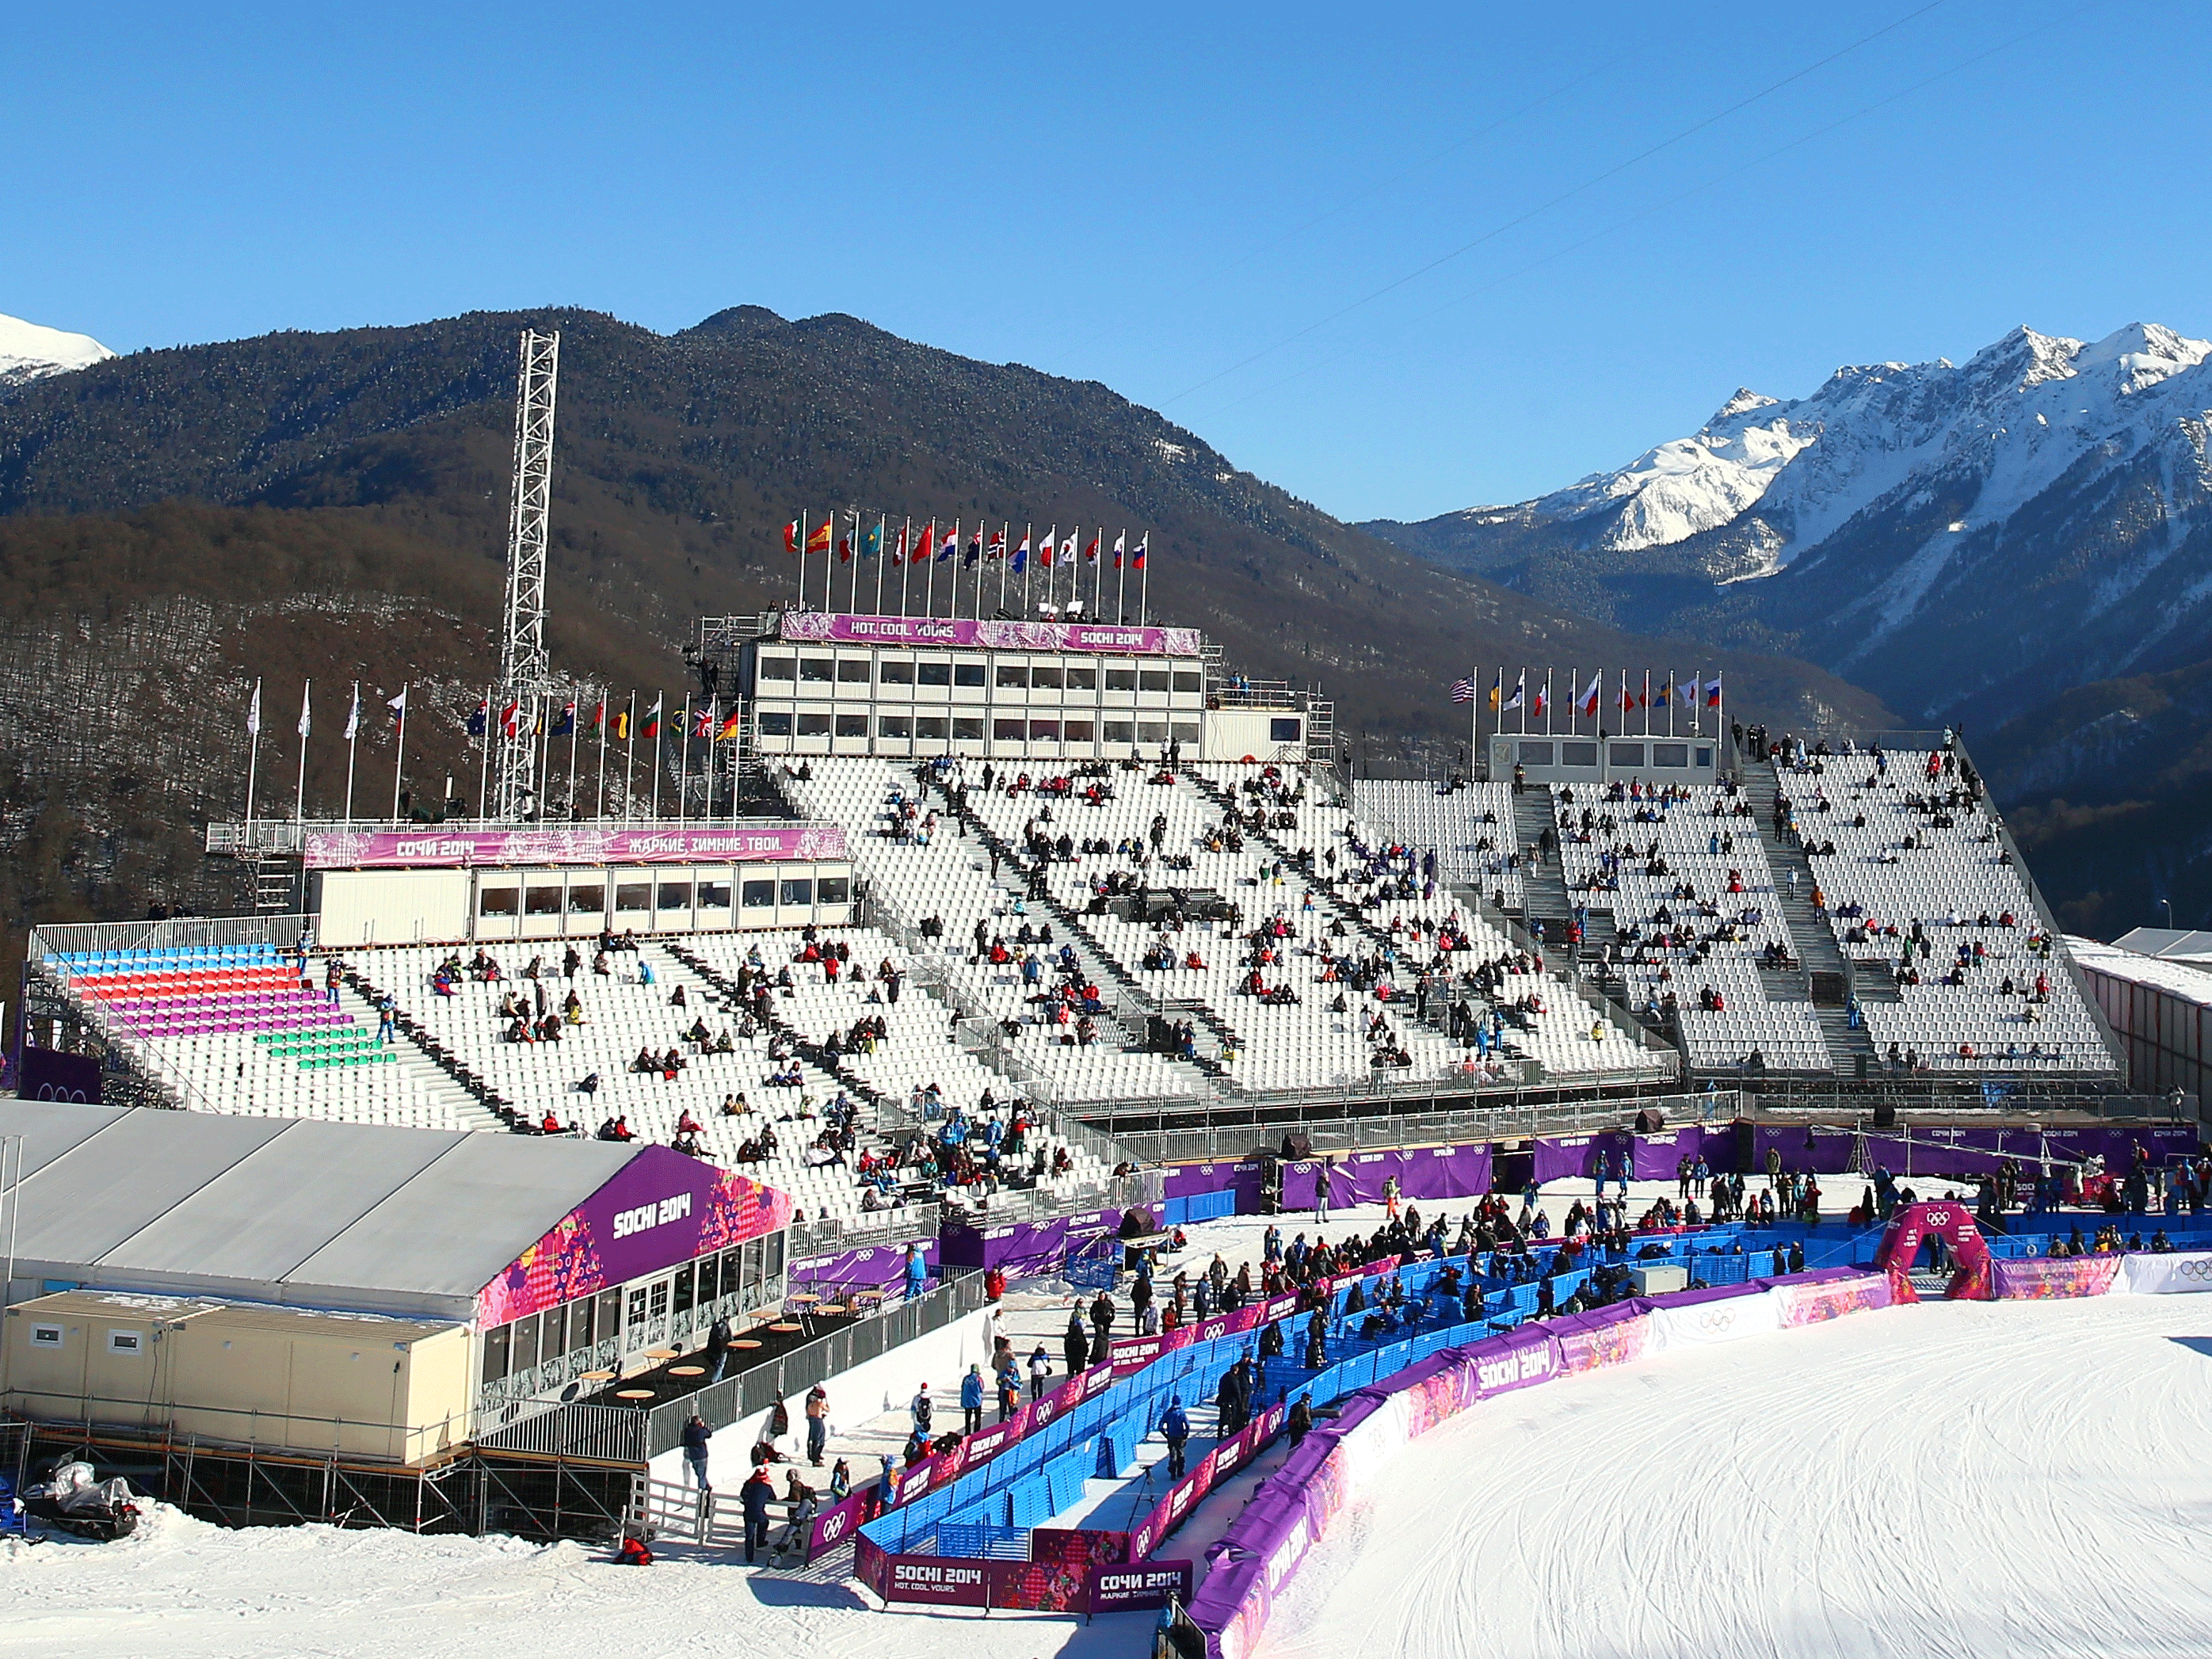 There are plenty of empty seats for day one of the slopestyle snowboarding competition in Sochi